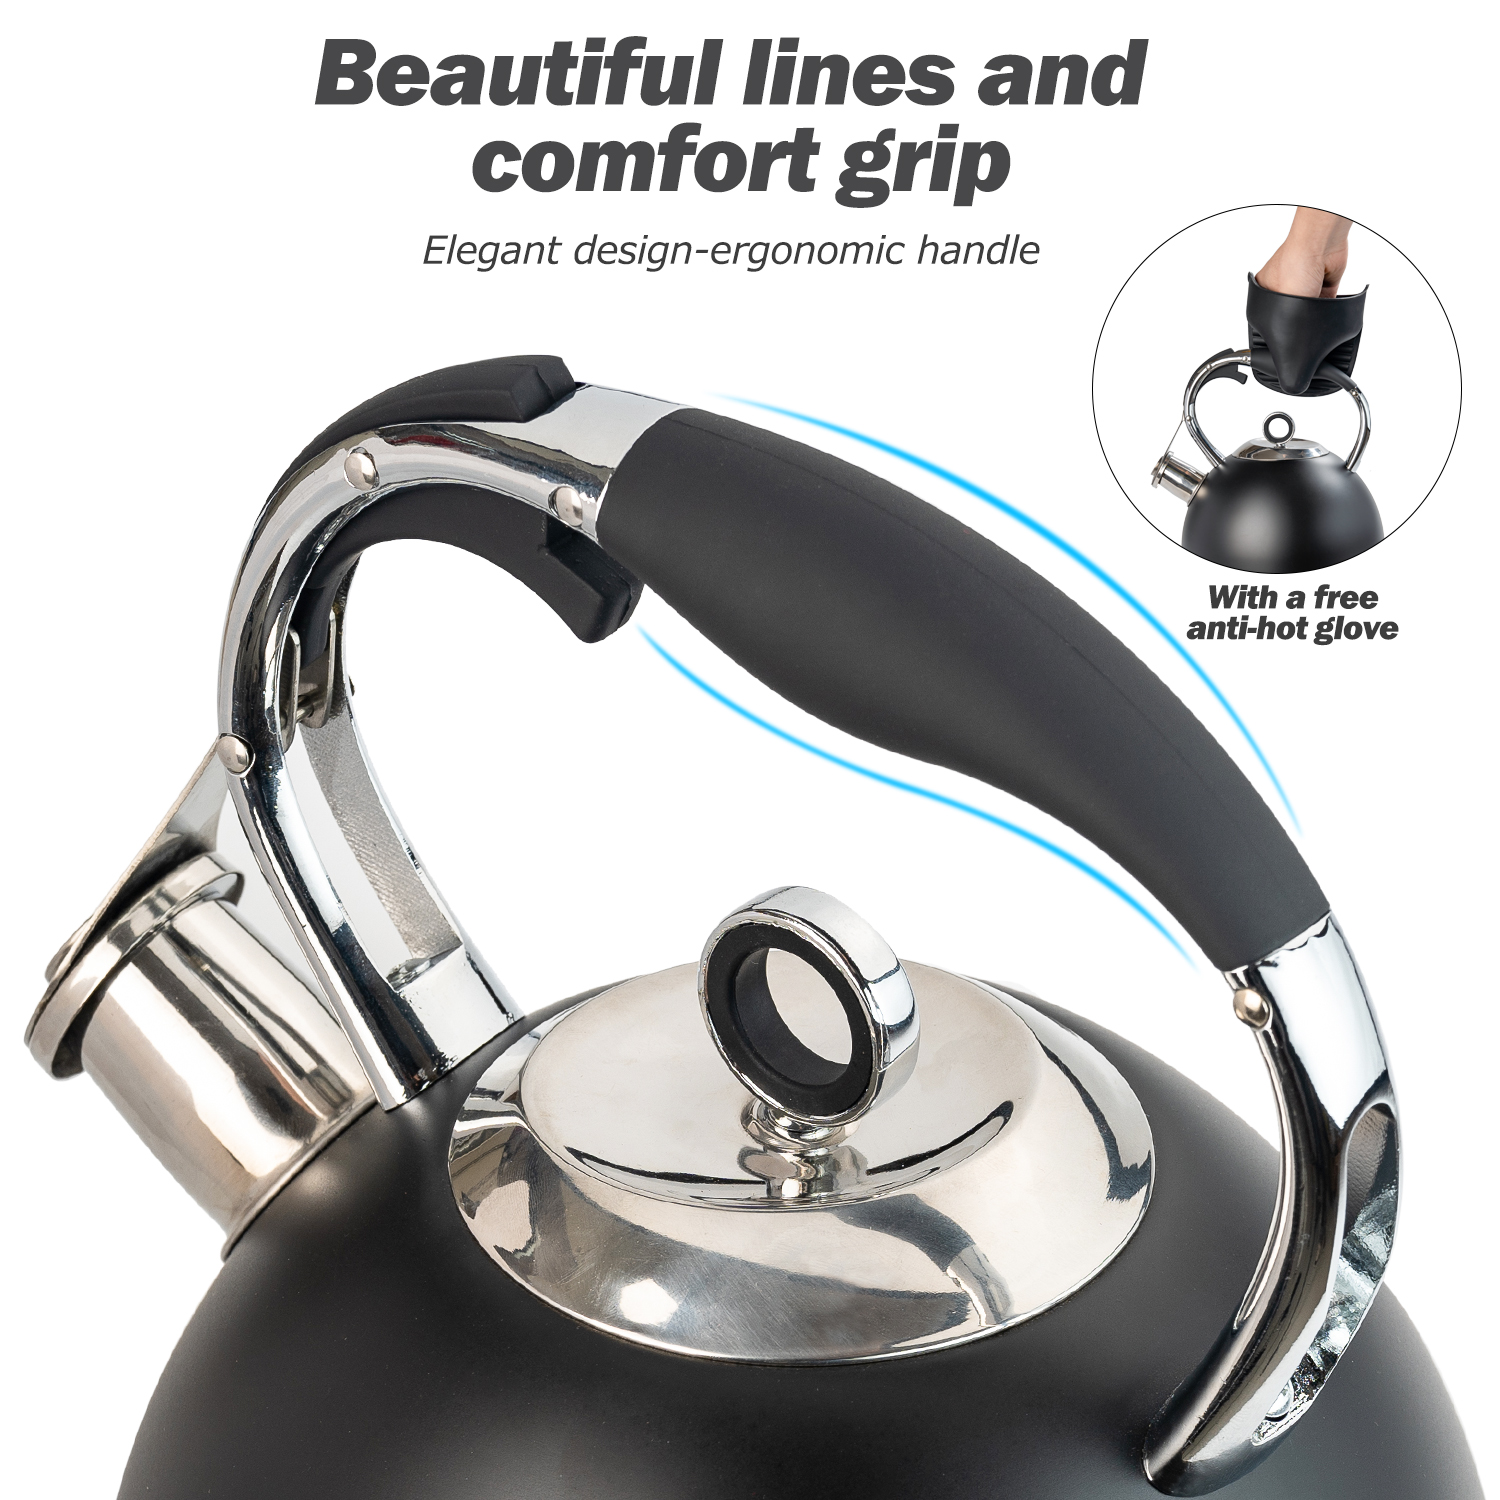 Tea Kettle for Stovetop, 3 Quart Loud Whistling Teapot with Cool Grip Ergonomic Handle Food Grade Stainless Steel Teakettle for Tea, Coffee (Black) - image 5 of 7